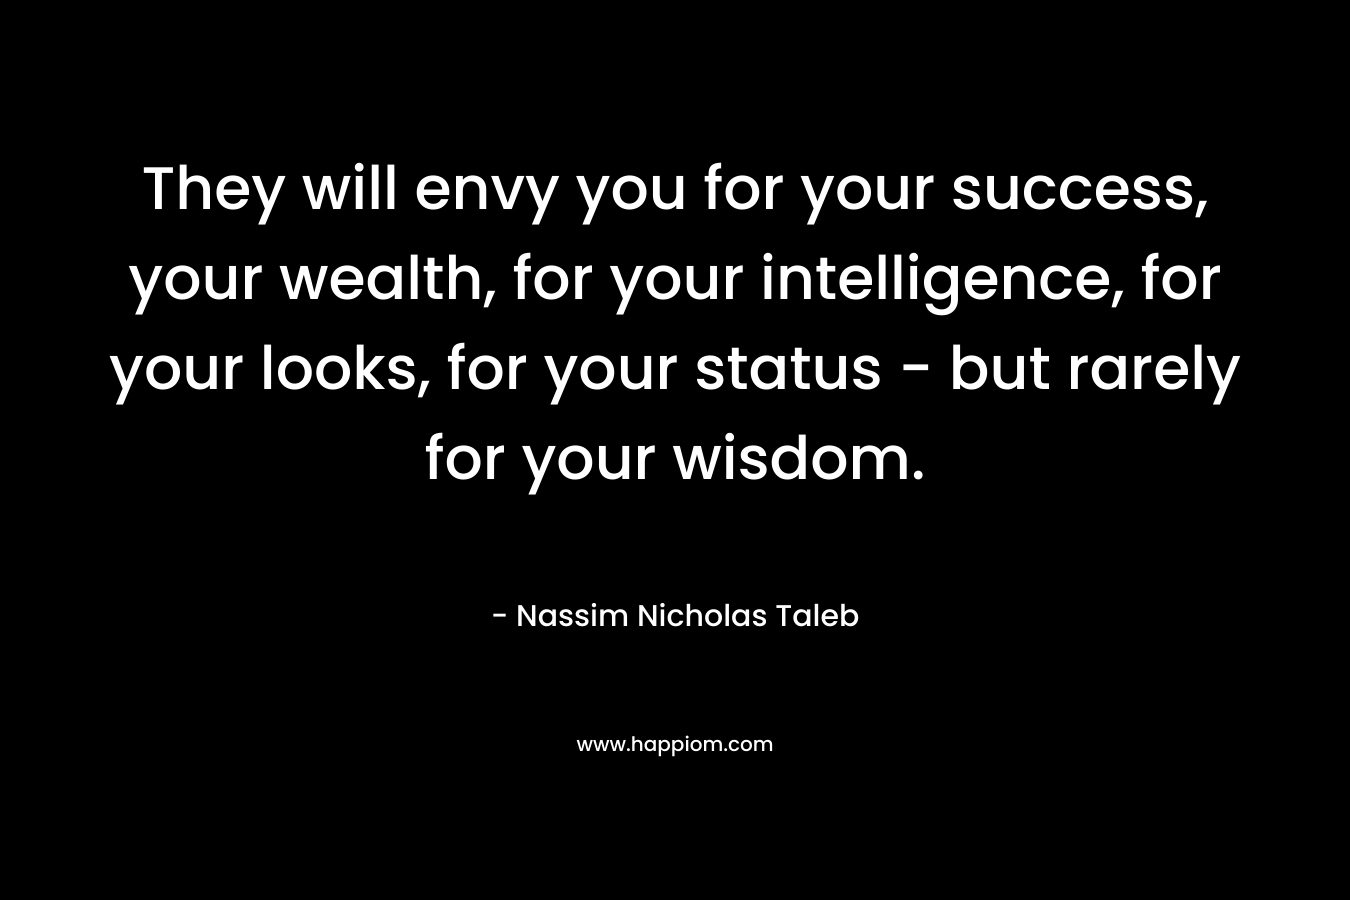 They will envy you for your success, your wealth, for your intelligence, for your looks, for your status – but rarely for your wisdom. – Nassim Nicholas Taleb